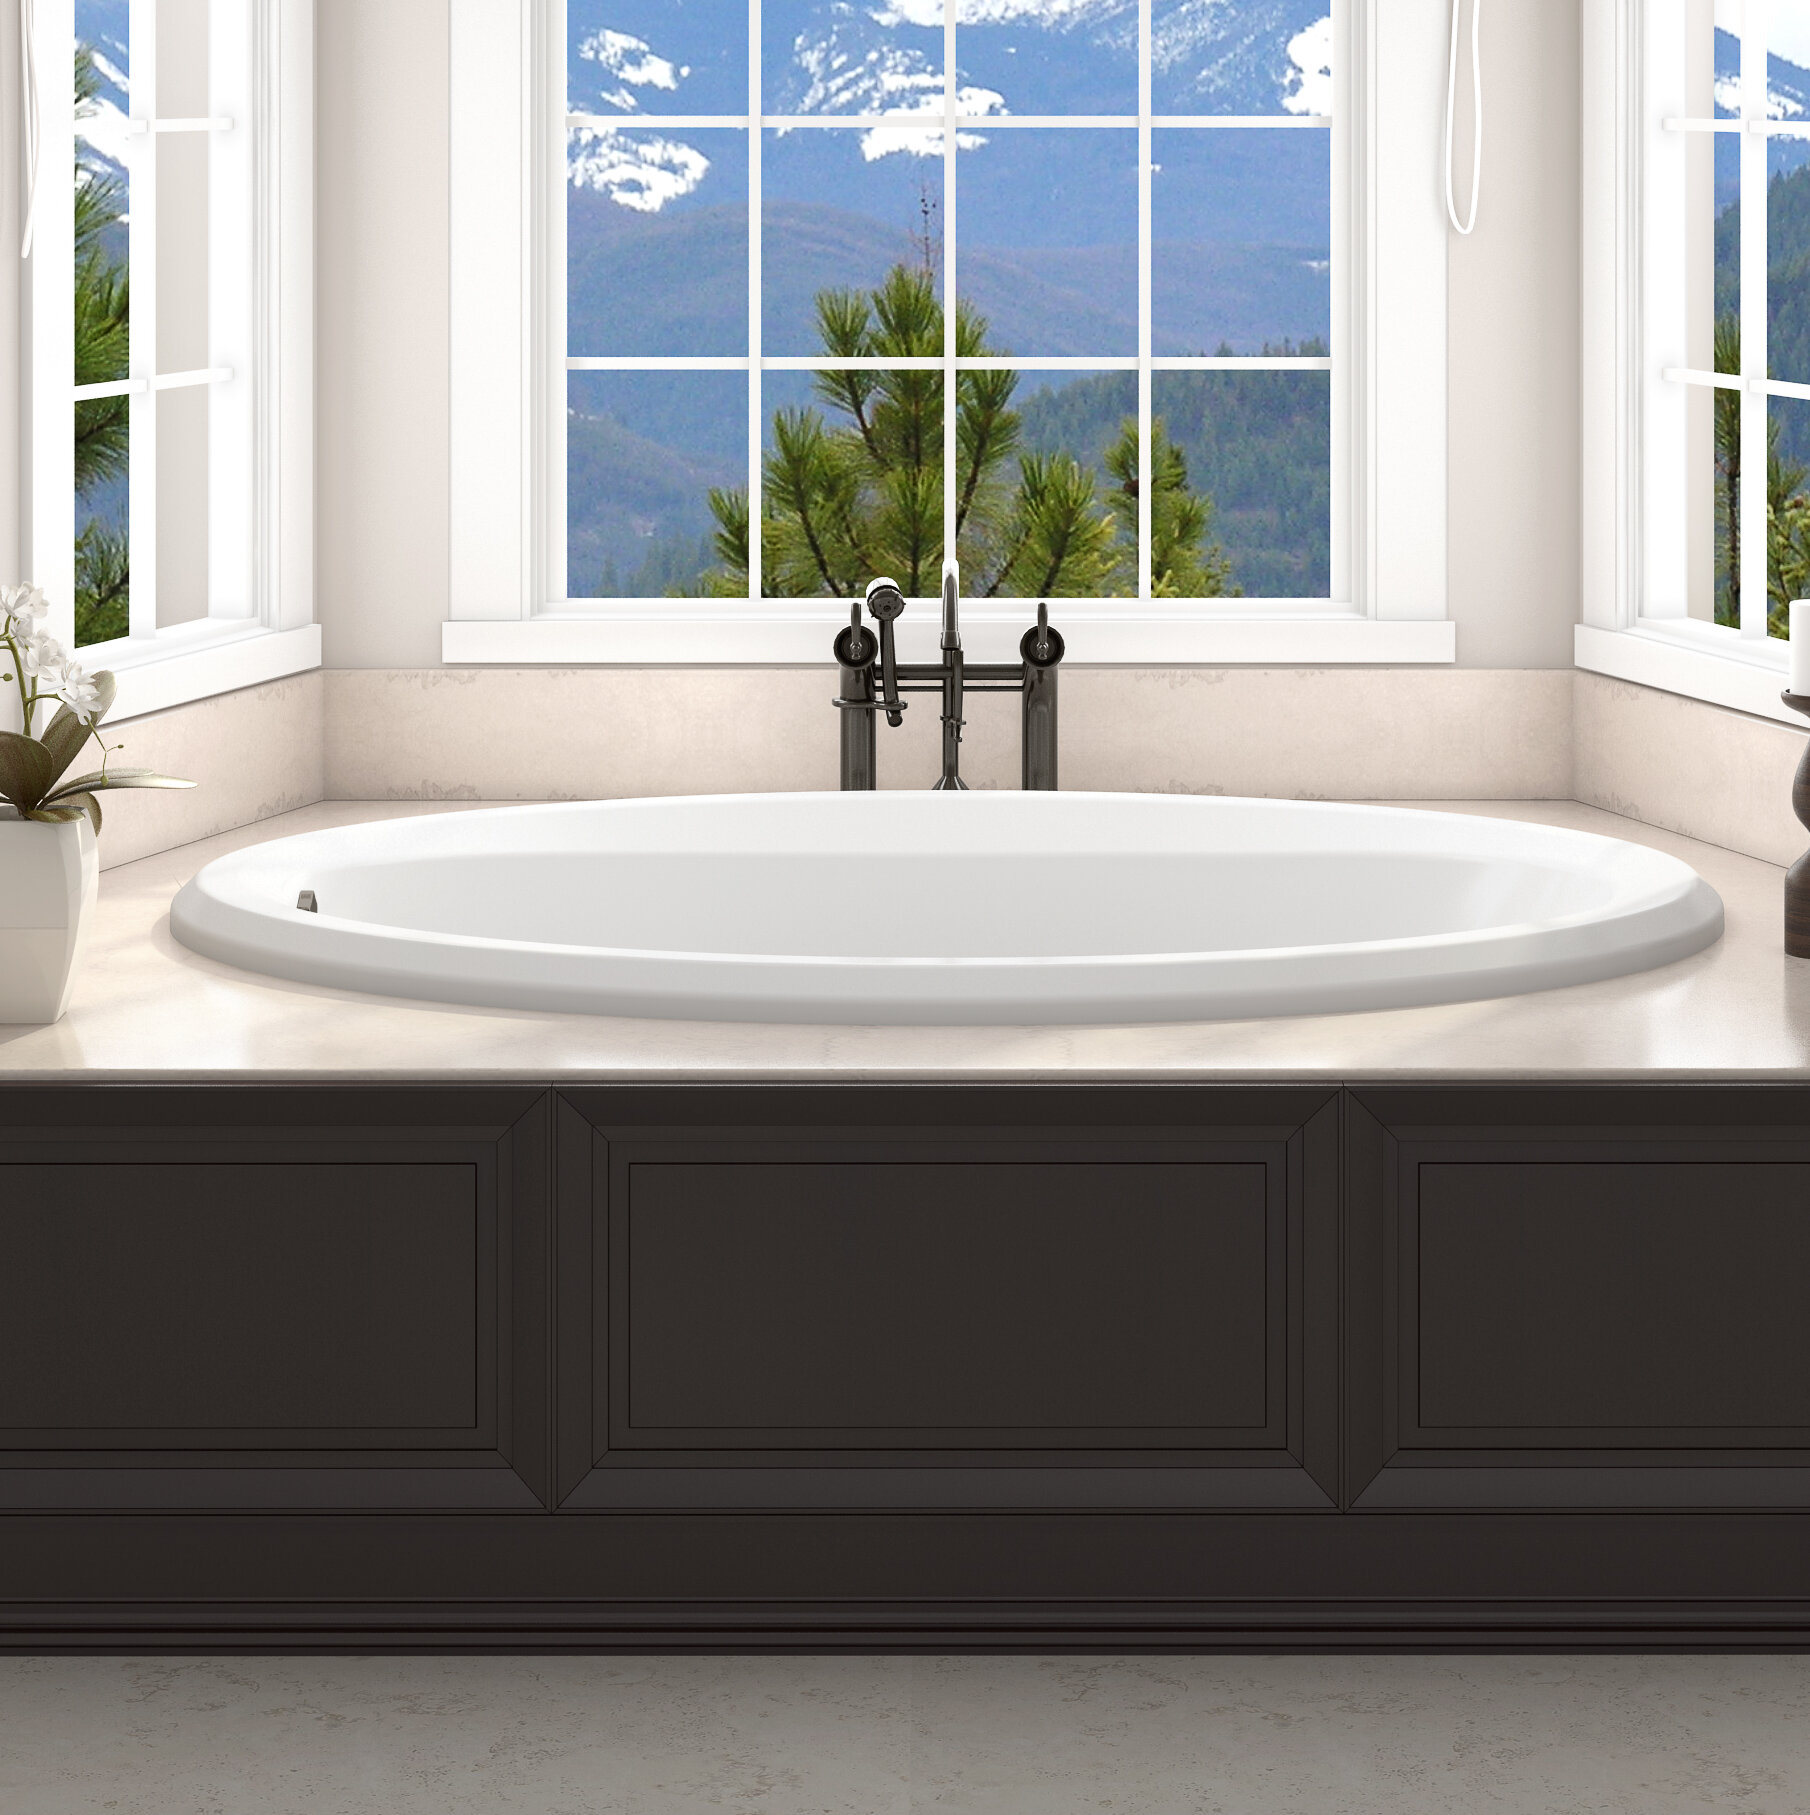 Jacuzzi J3d6042 WLR 1xx 60" X 42" Signature Drop in Whirlpool Bathtub With 6 for sale online 